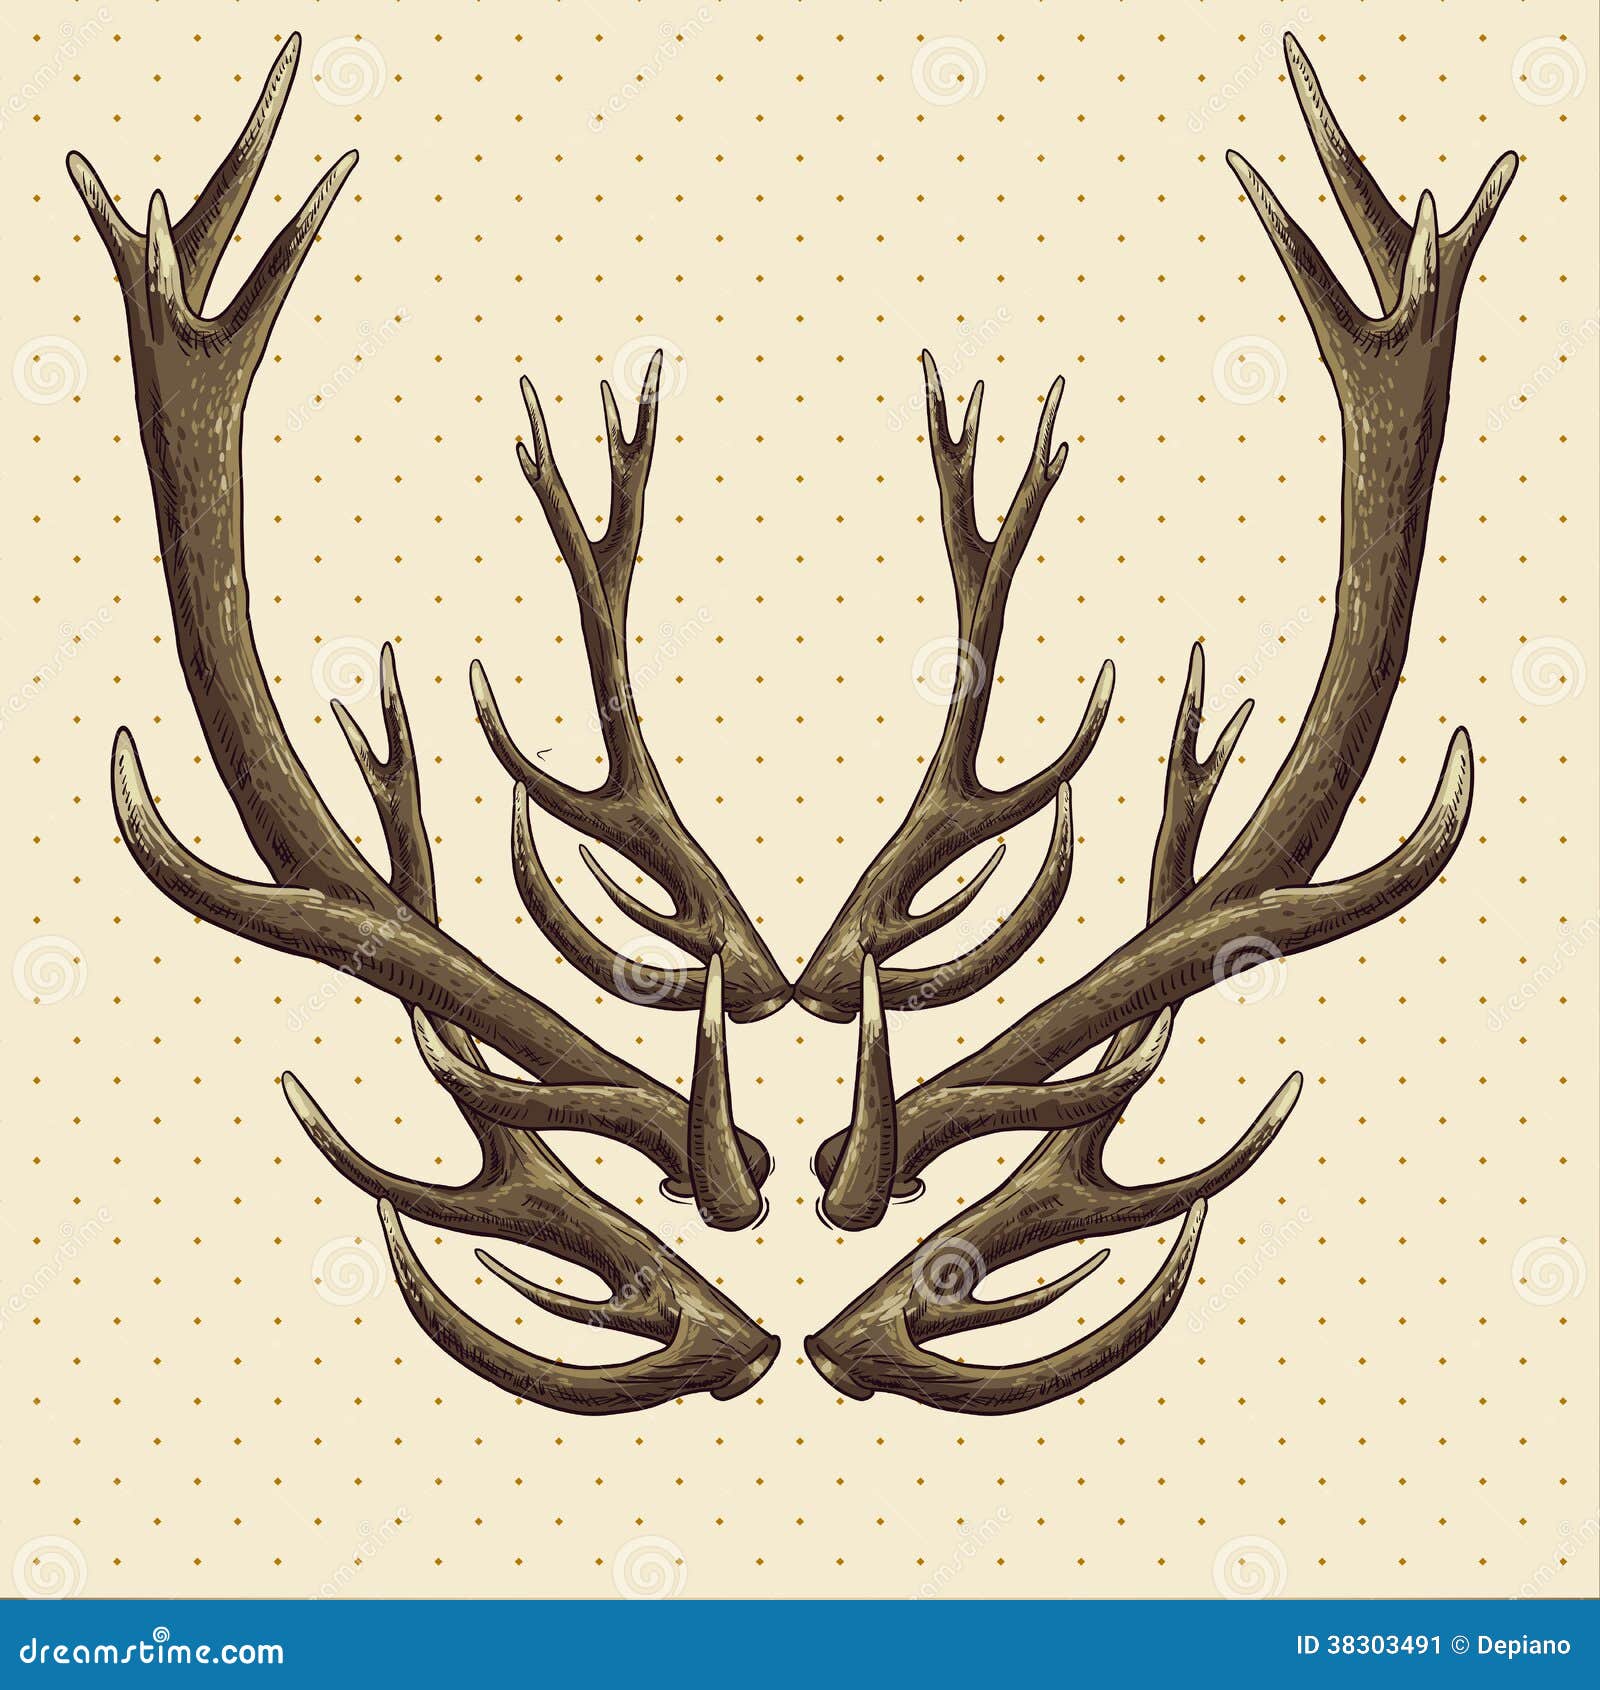 mustache tumblr backgrounds Stock With Hipster Deer Vintage Antlers Image Background